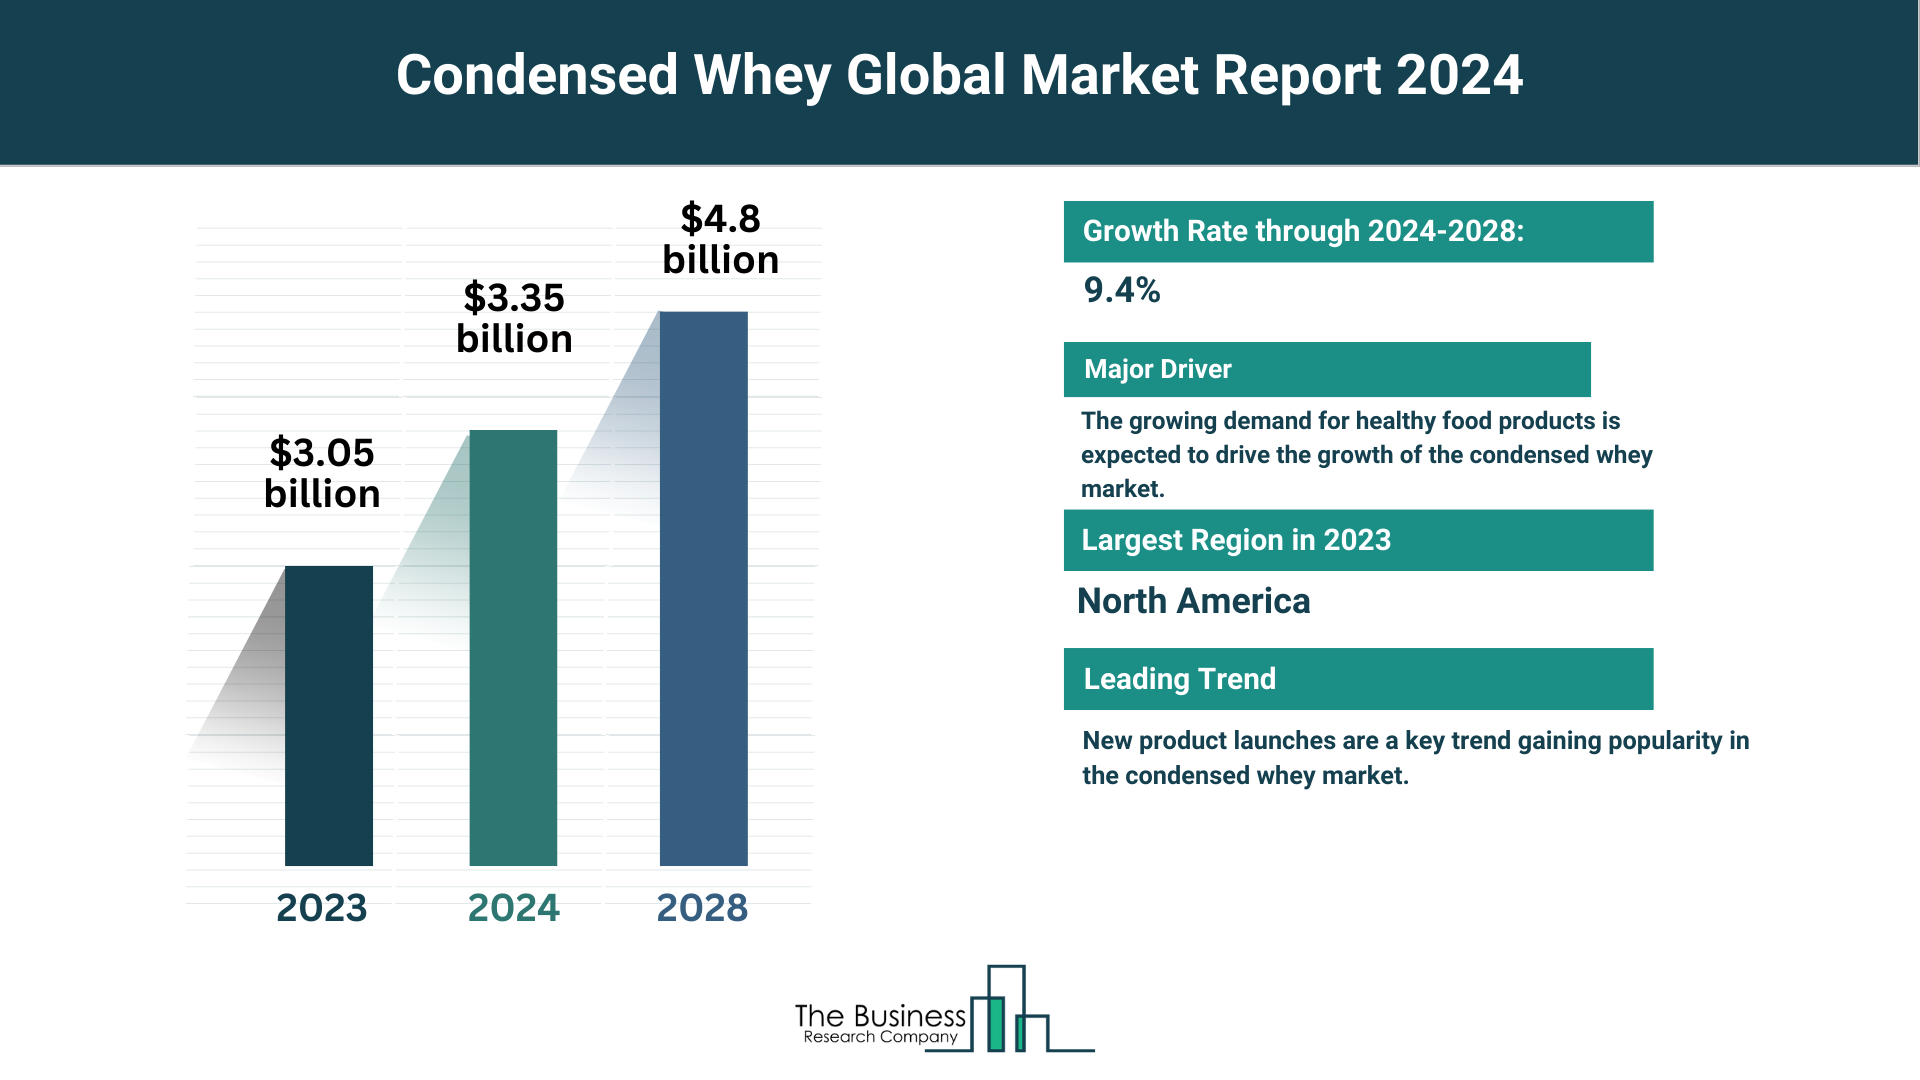 Global Condensed Whey Market